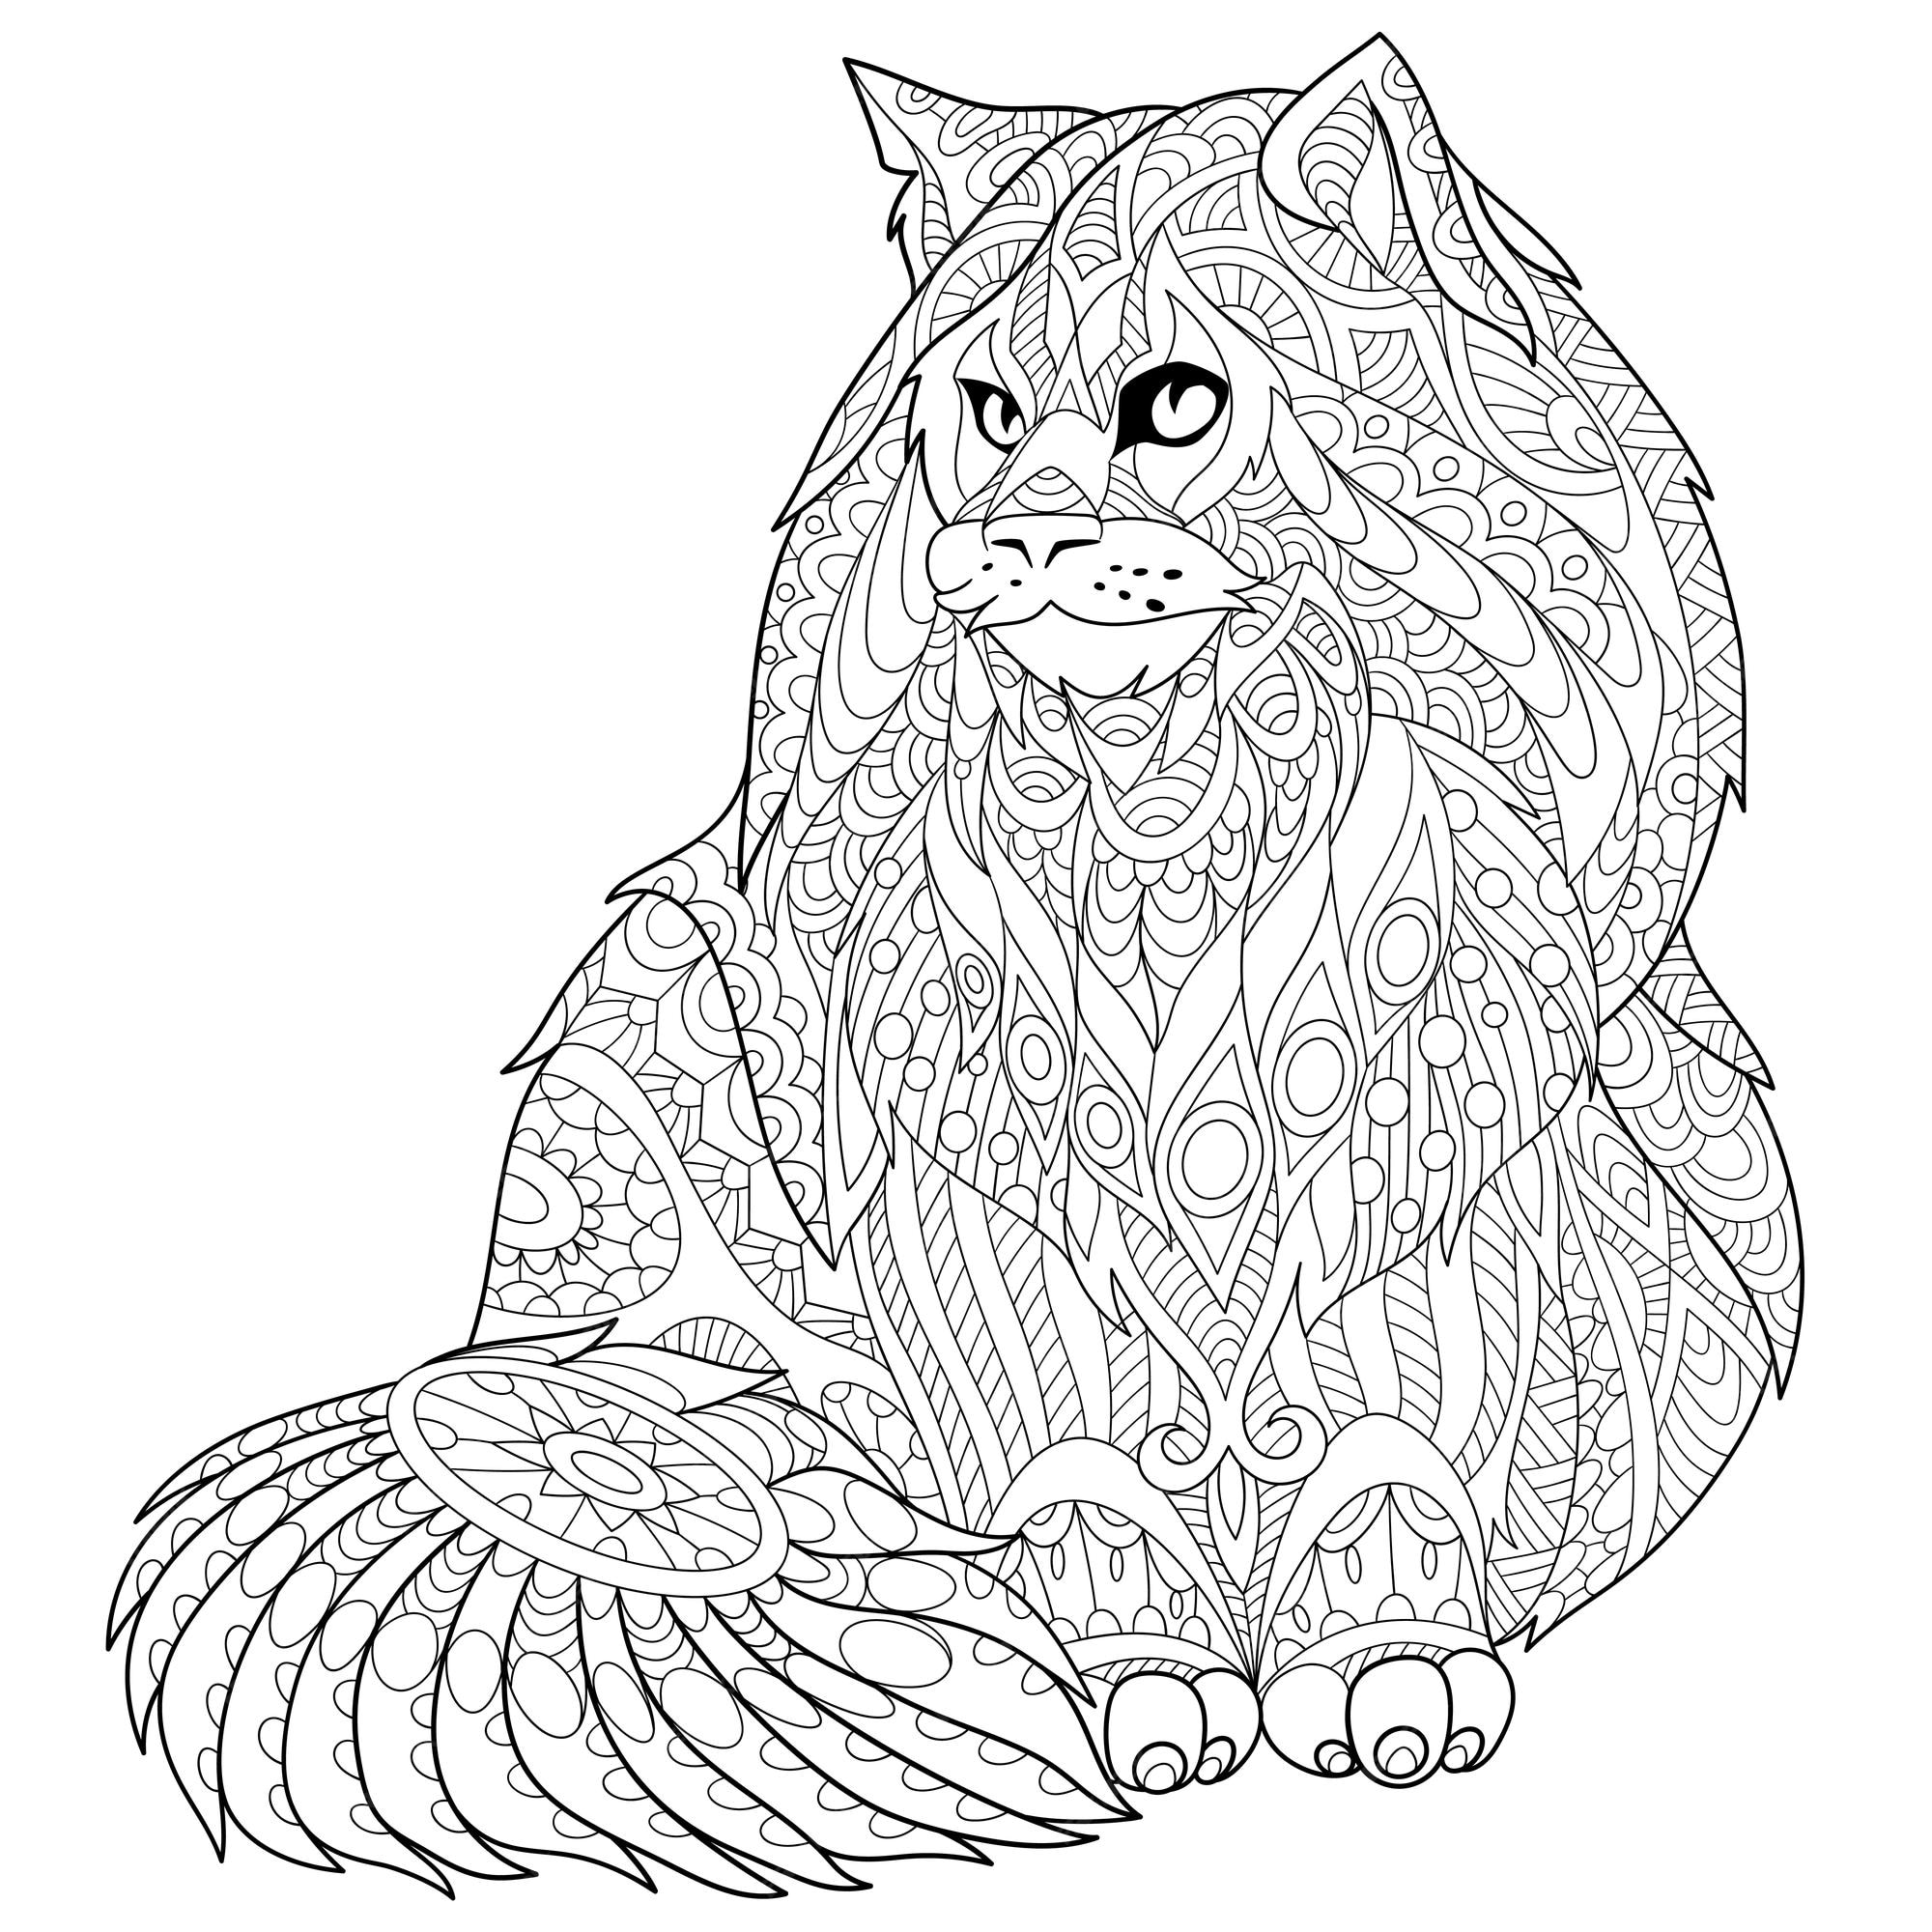 Premium vector maine coon cat zentangle colouring illustration line art design for adult coloring book page